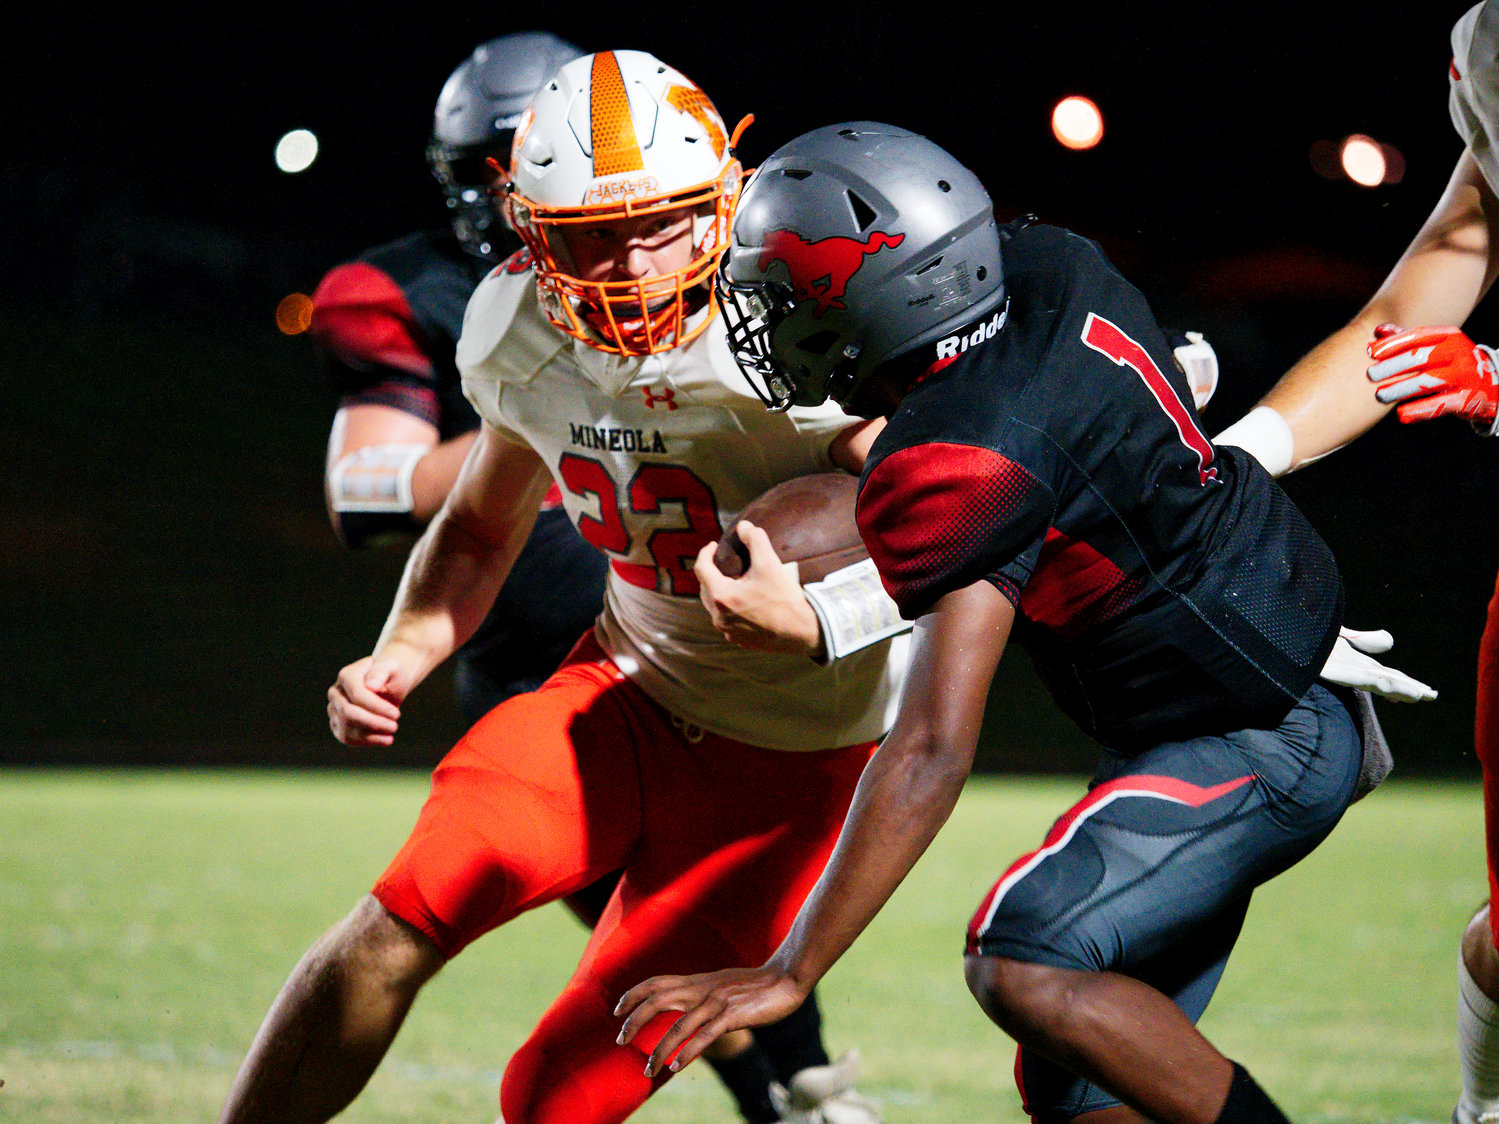 Dawson Pendergrass eyes the Mustang defender as he cuts back Sept. 2 at Hughes Springs.